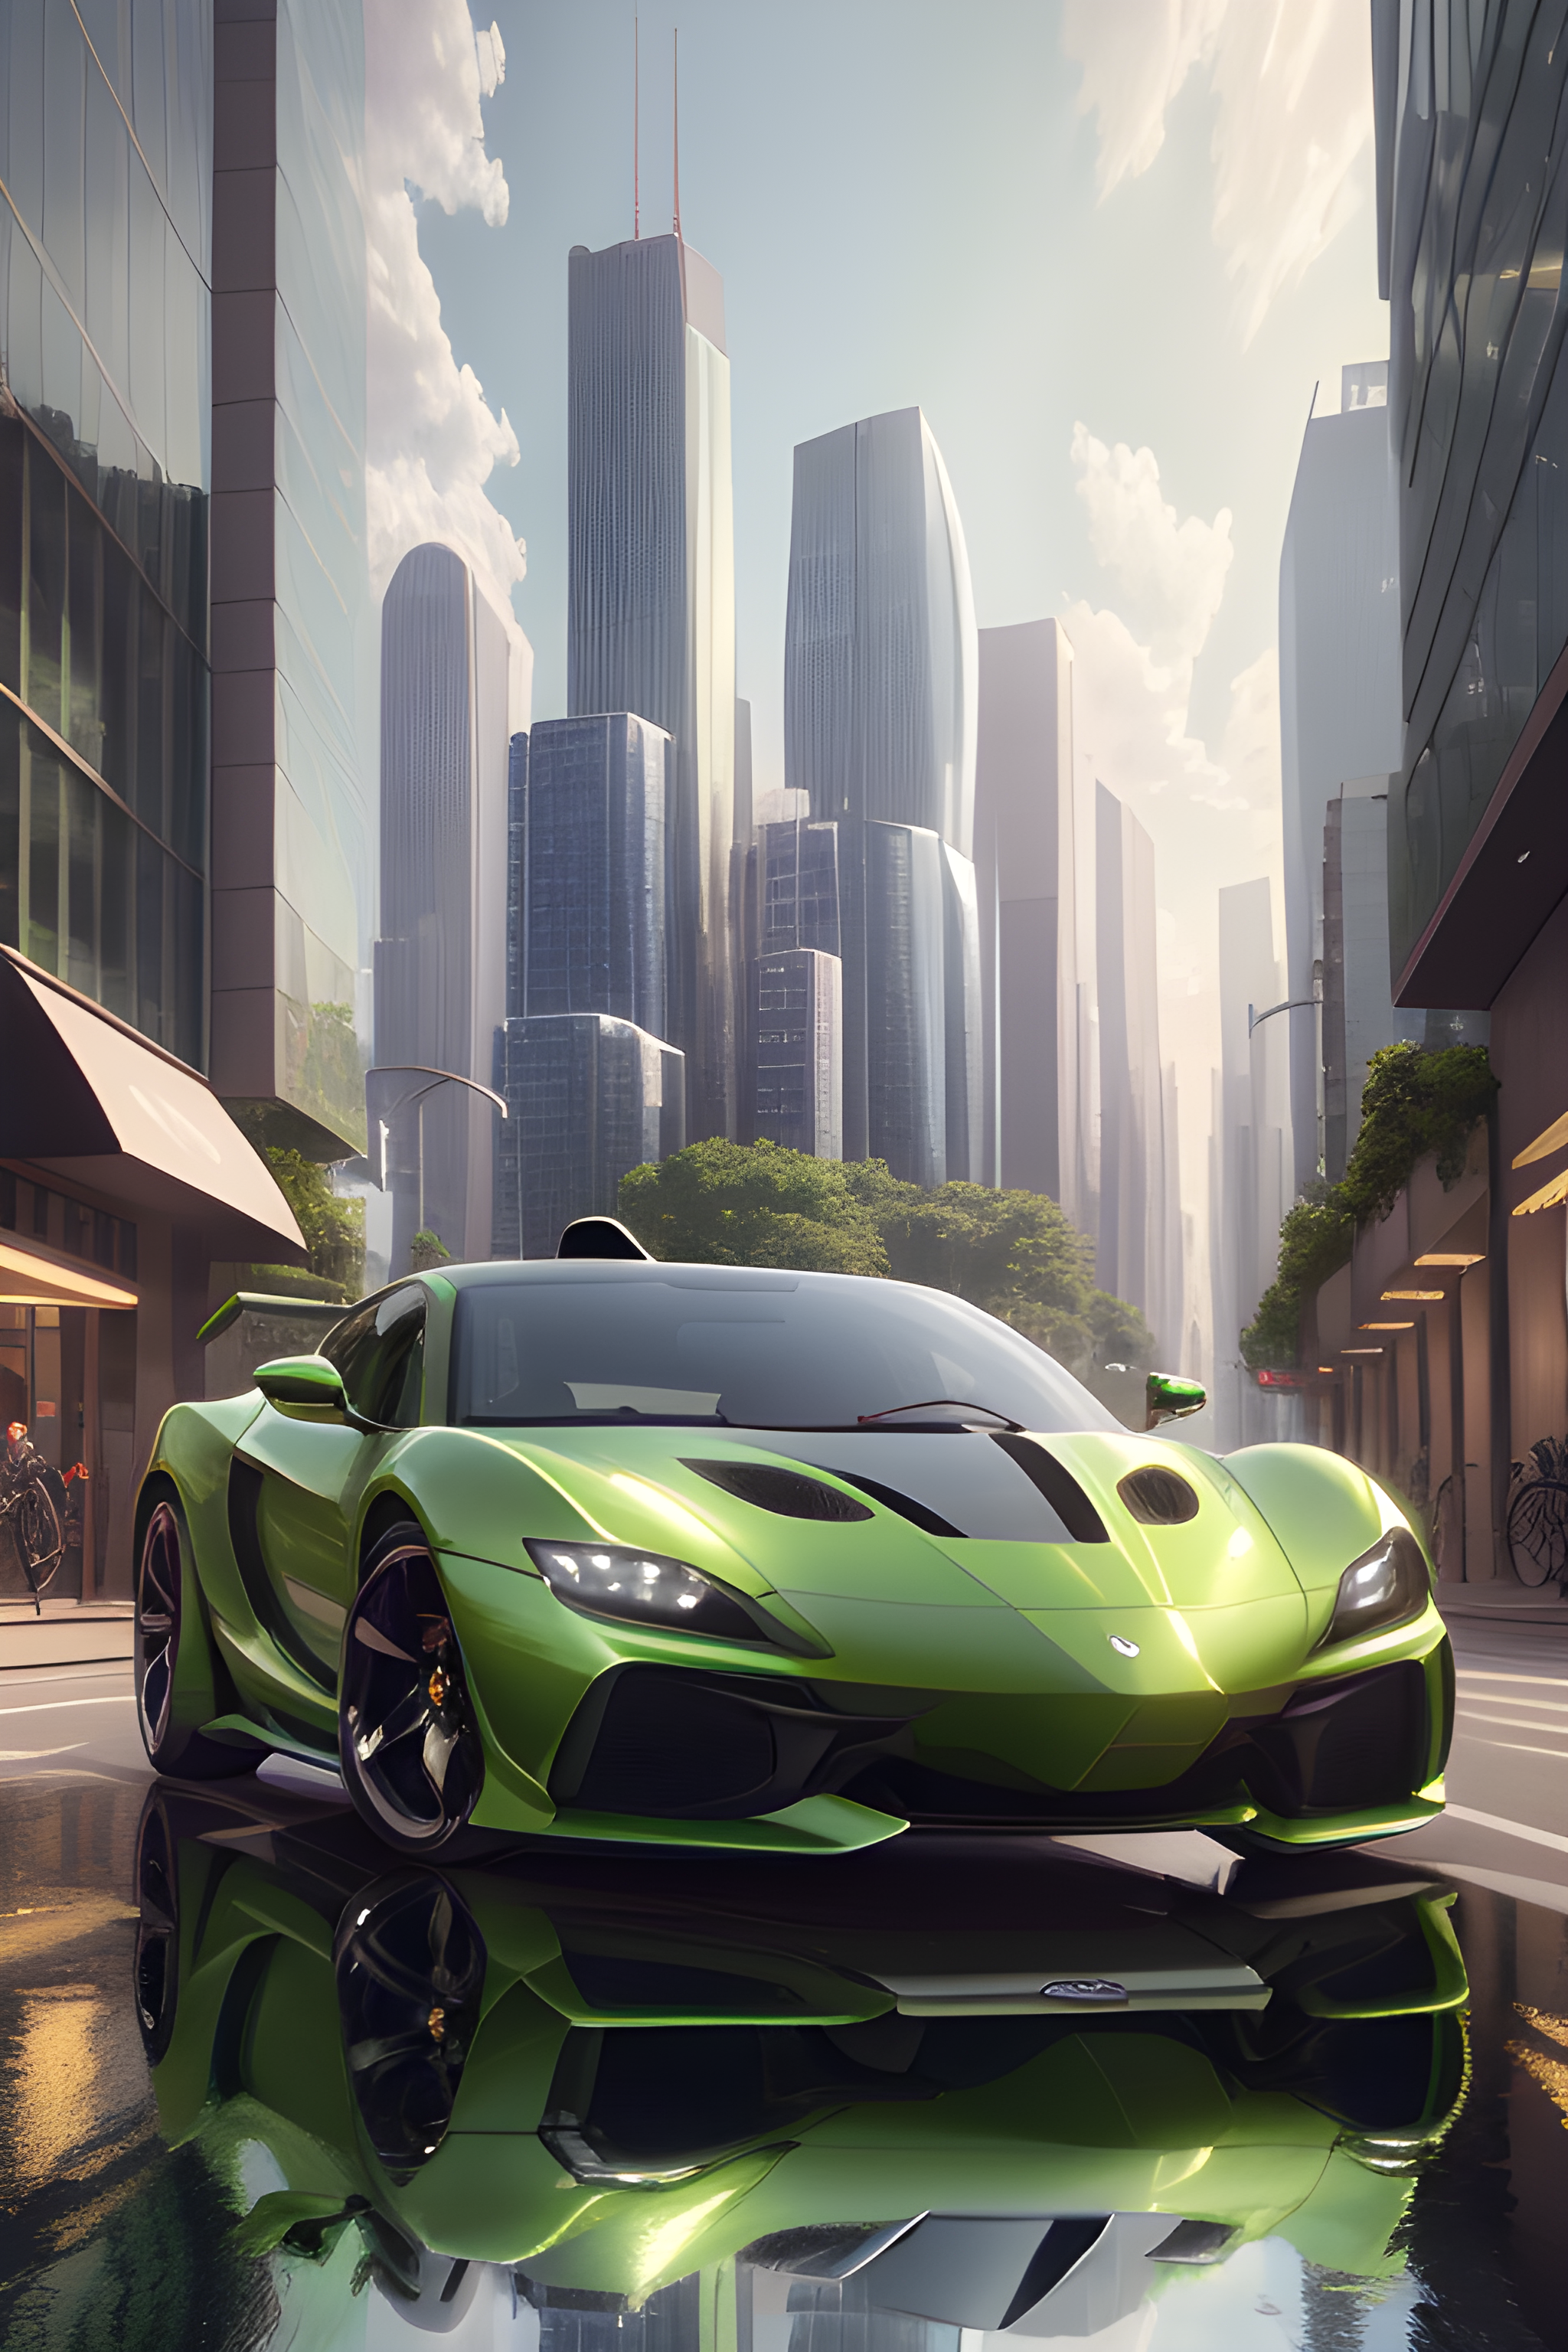 Image of a beautiful green sports car on a city street with reflections